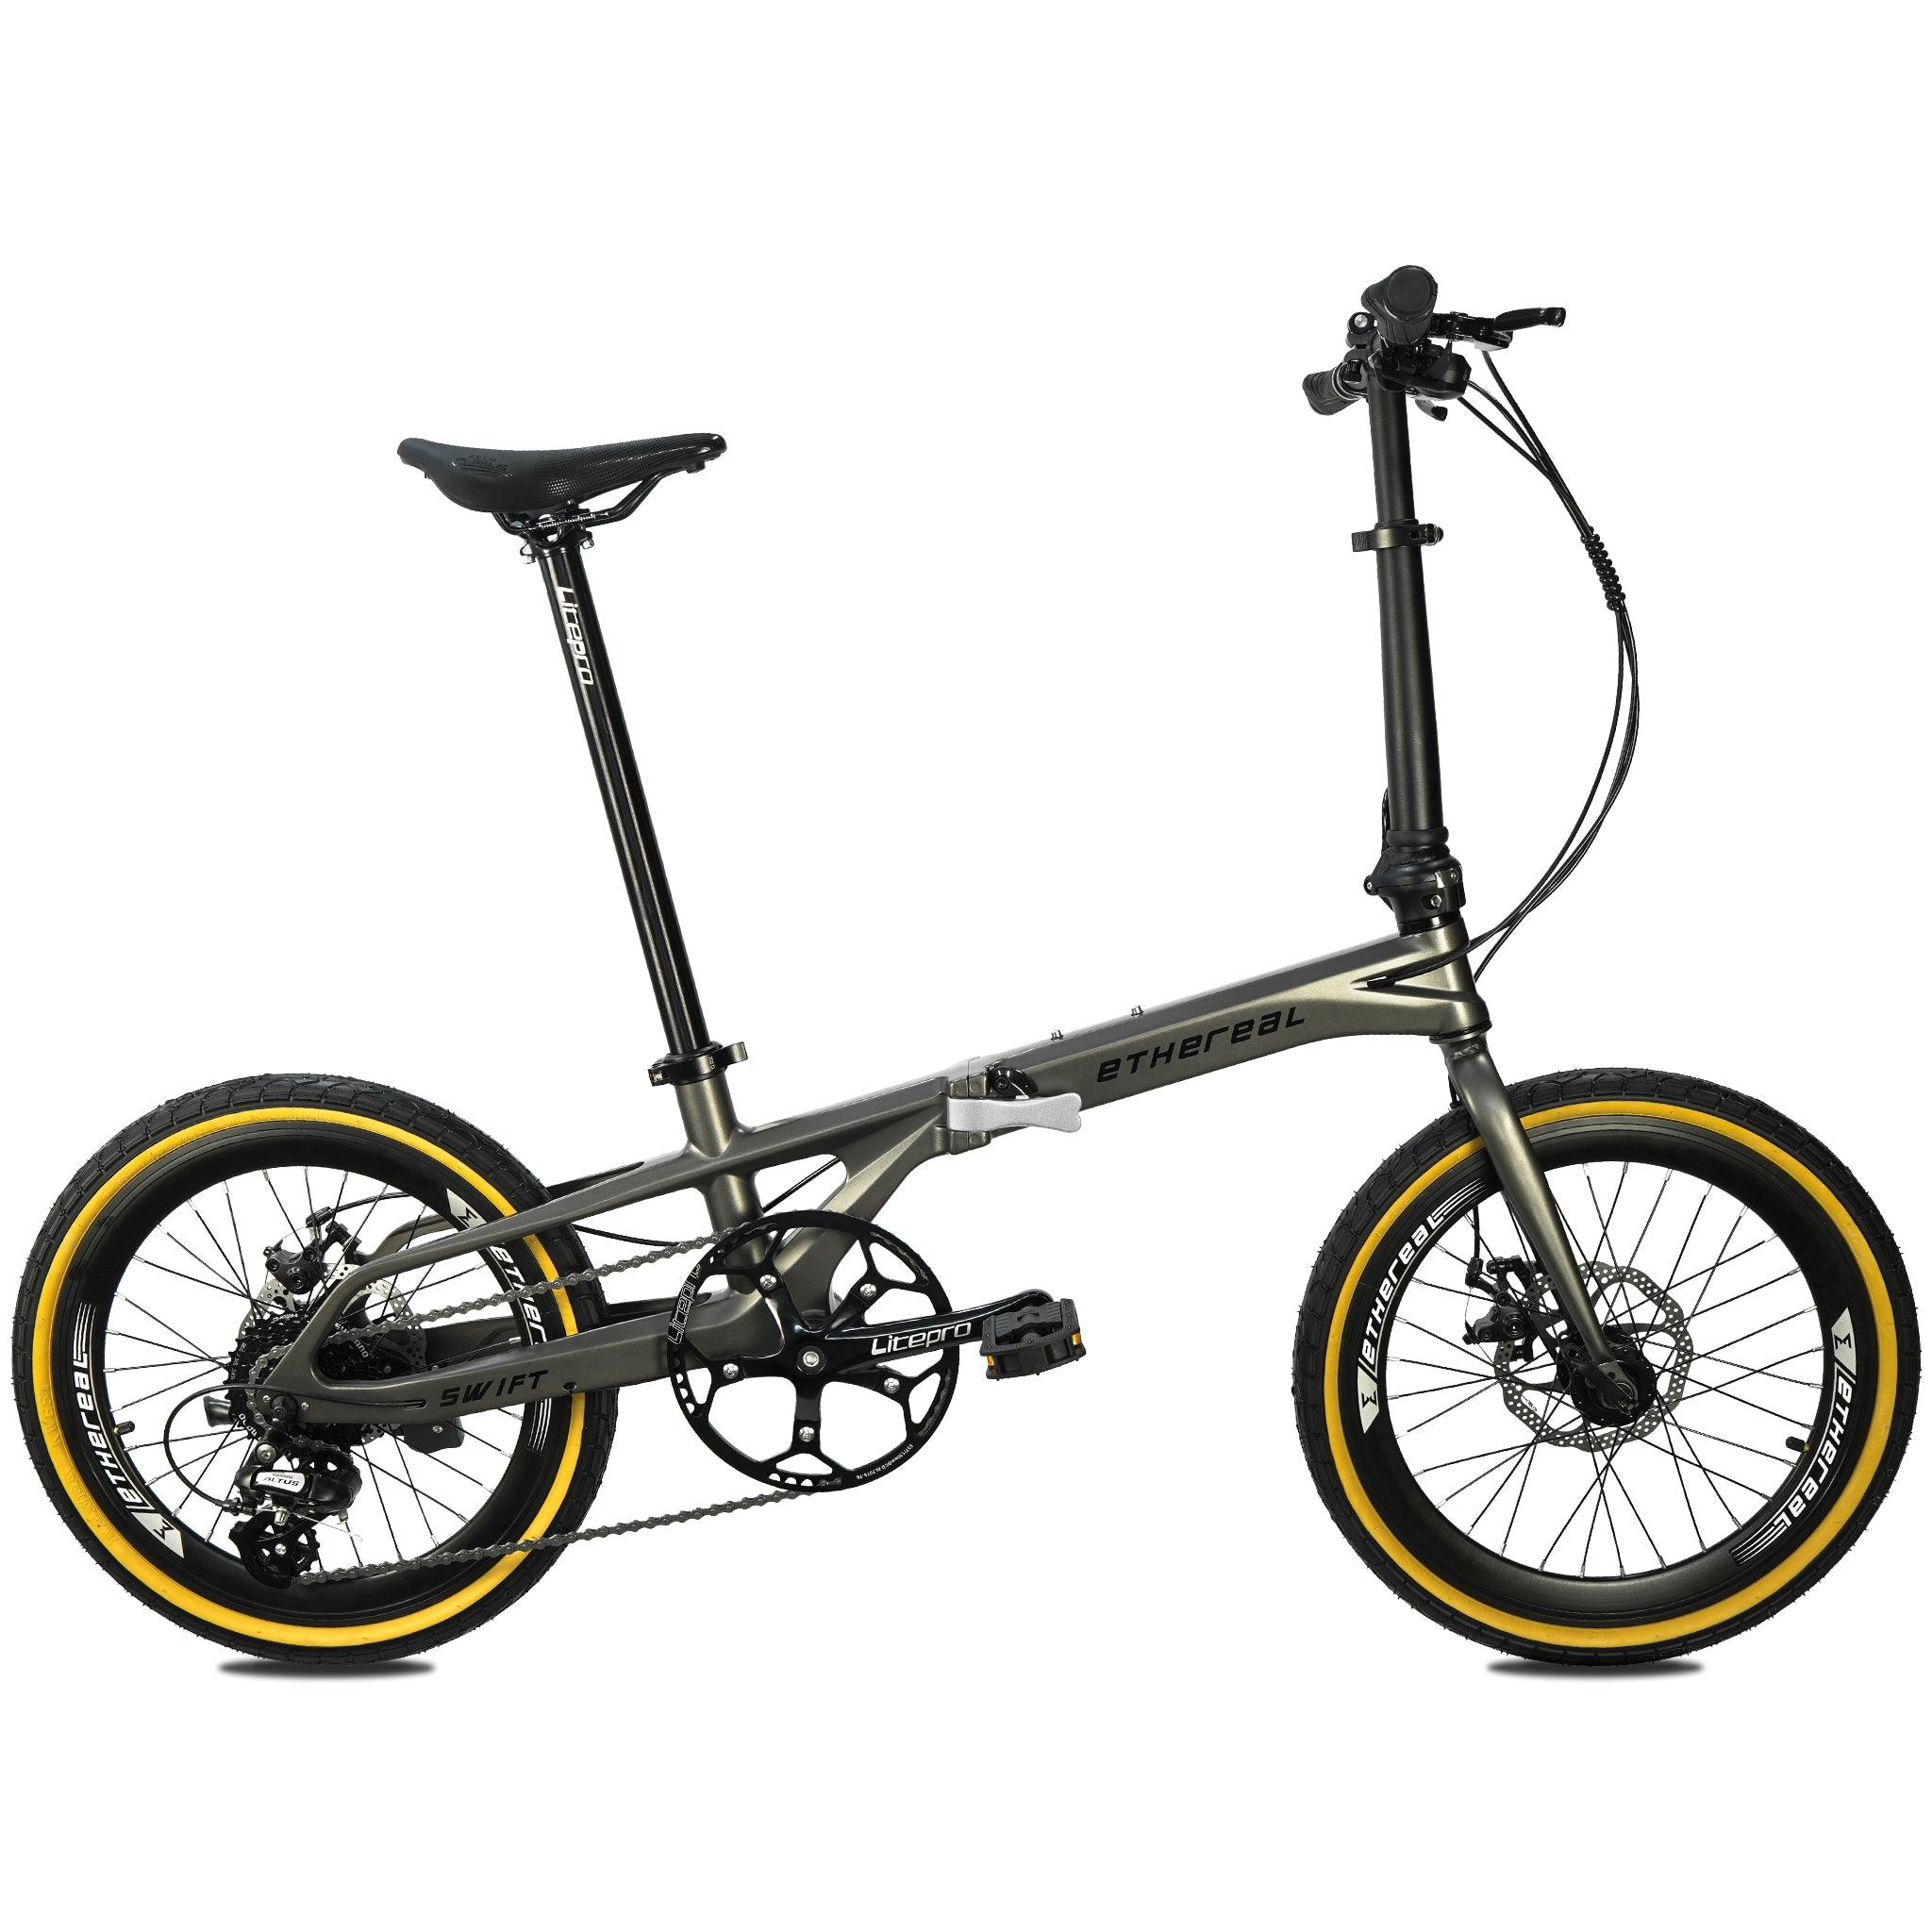 Ethereal Swift Gen 2 foldable bicycle with Shimano Altus 8-speed derailleur, Zoom mechanical disc brakes, Kenda tanwall pneumatic tires, and lightweight magnesium alloy frame - The Bike Atrium - Best Bicycle Shop in Singapore